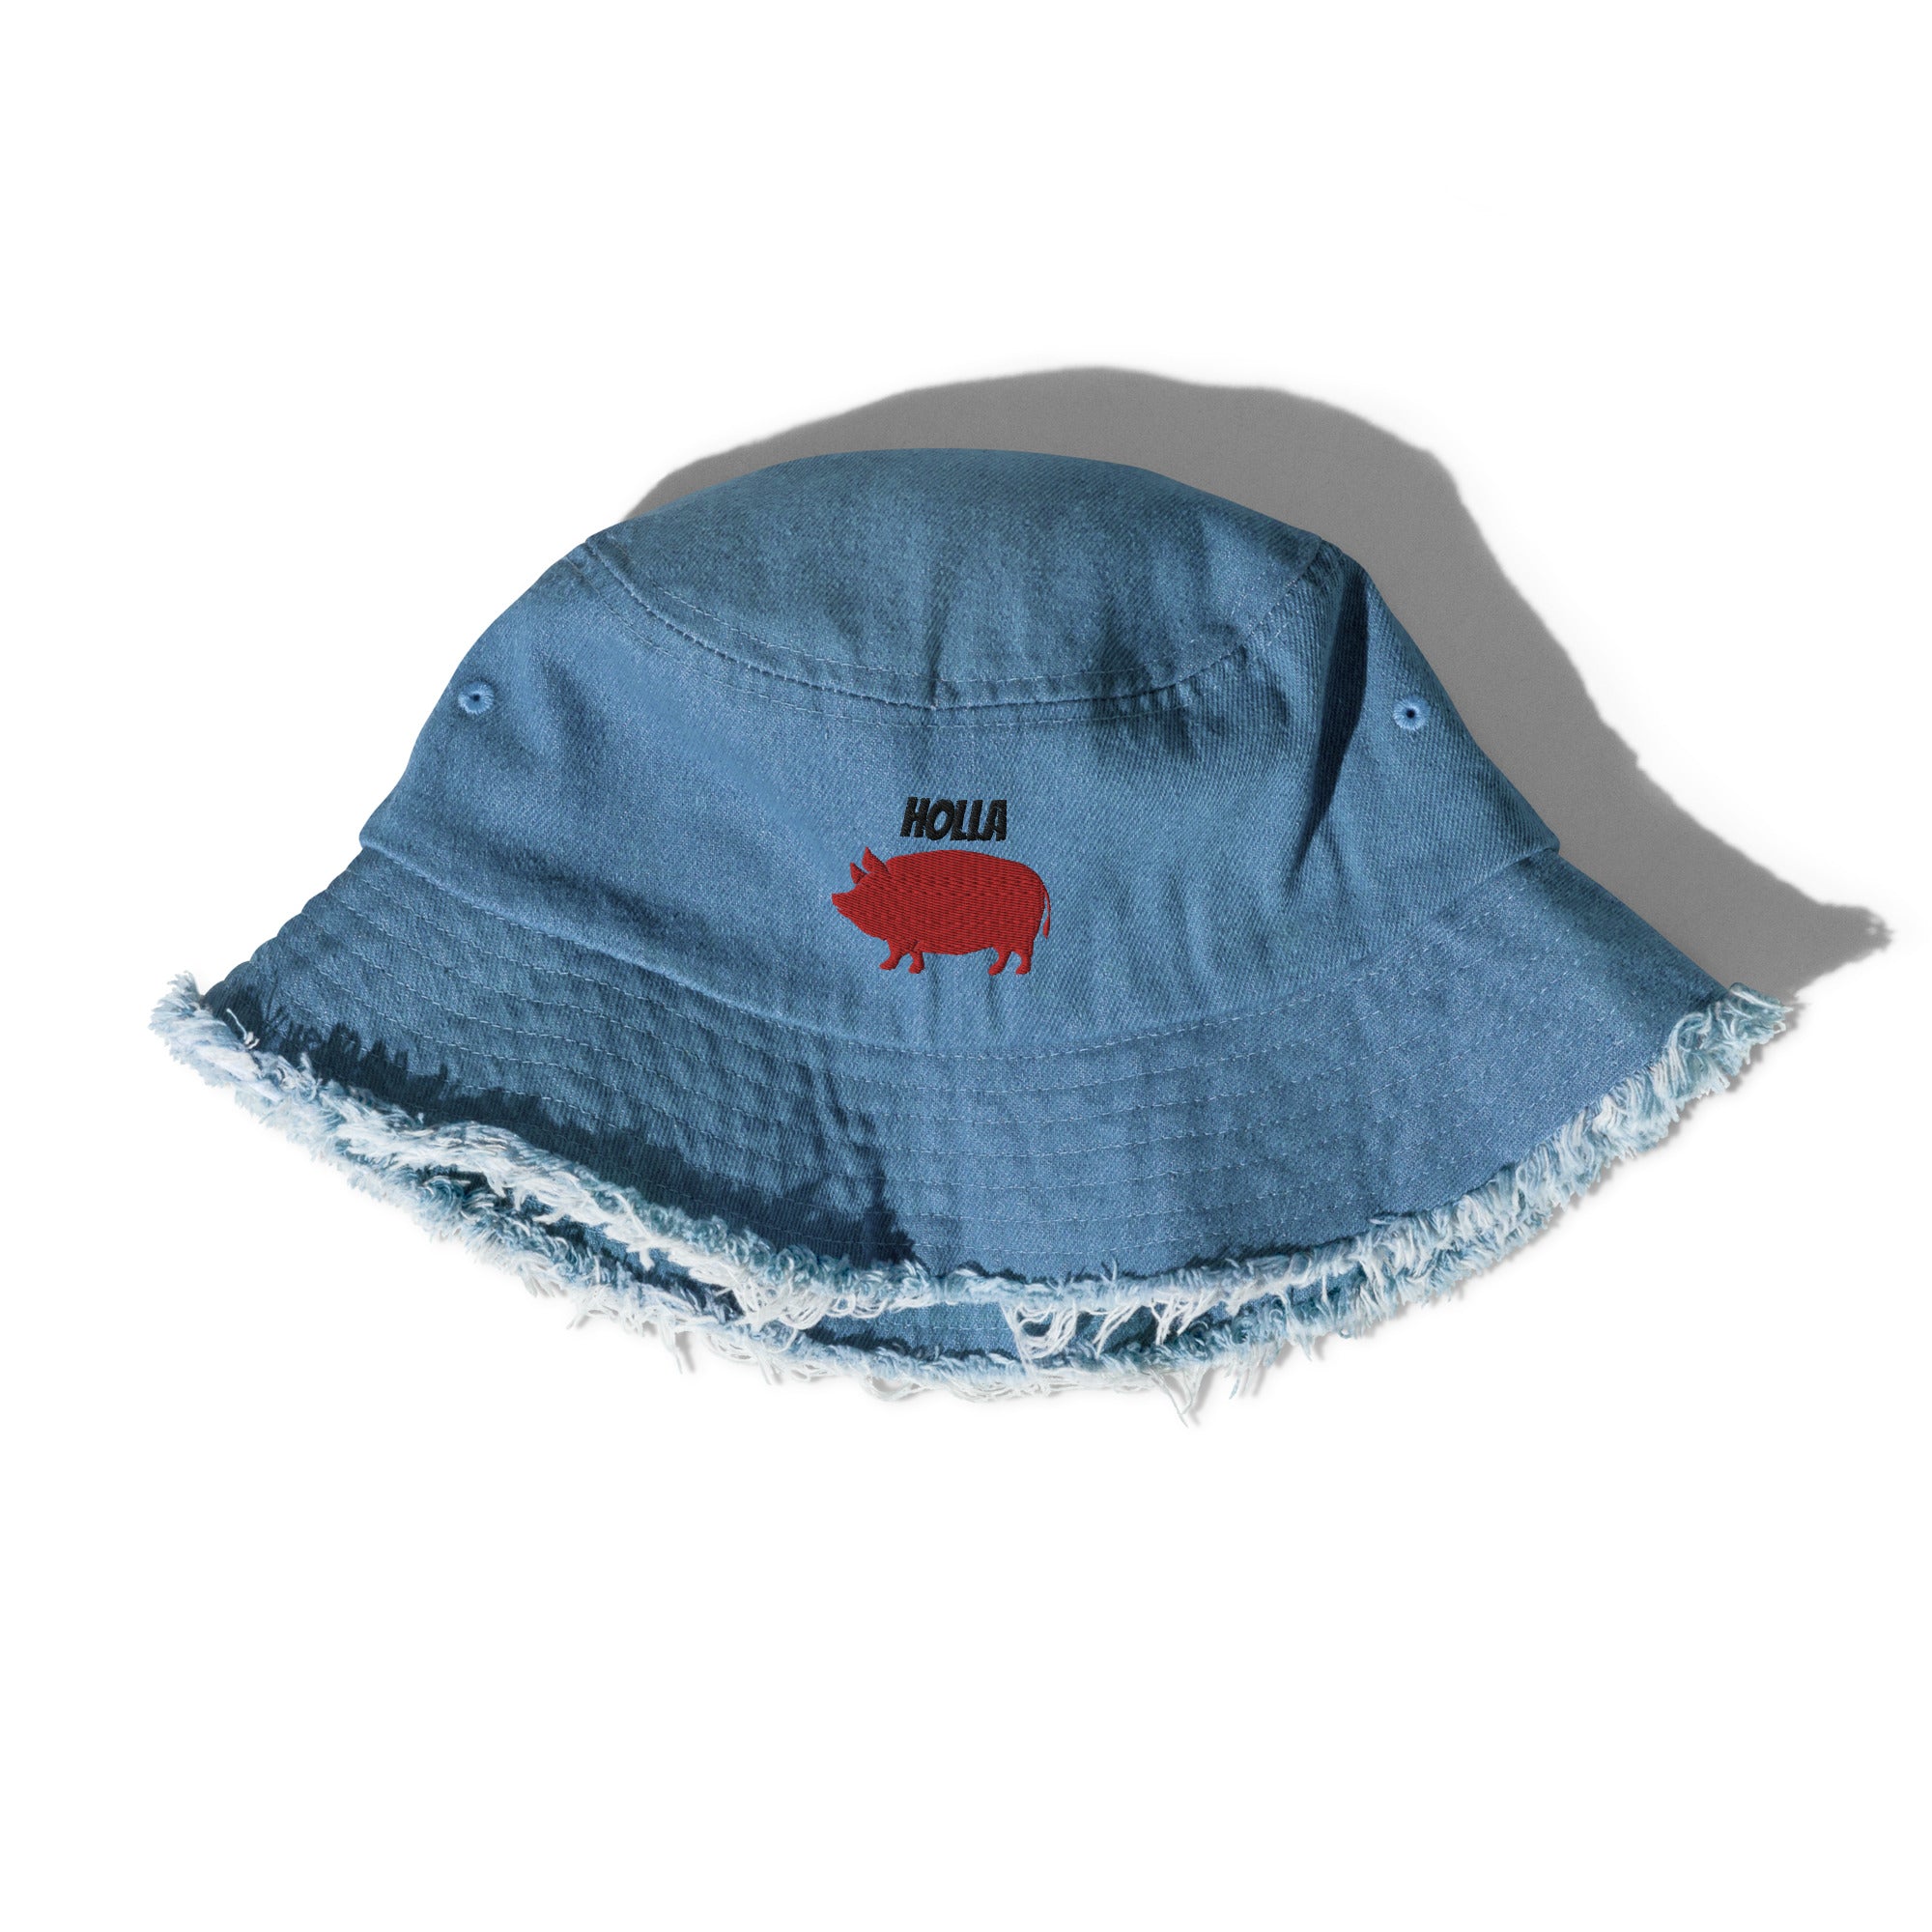 Gallery Dept. Distressed Denim Bucket Hat - Blue Hats, Accessories -  WGTAP21634 | The RealReal